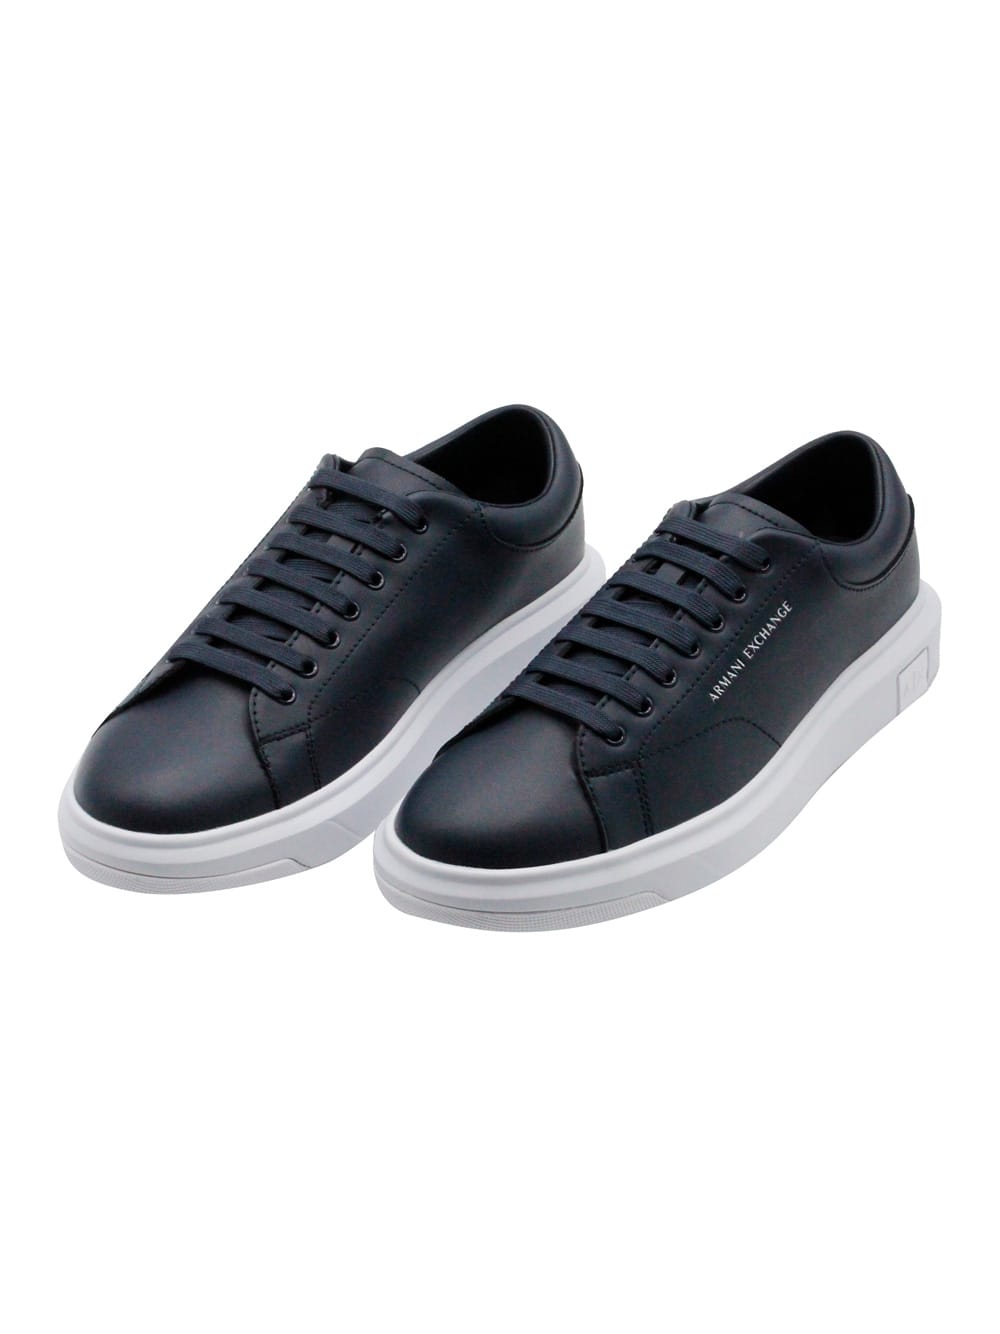 Leather Sneakers With Matching Box Sole And Lace Closure. Small Logo On The Tongue And Back